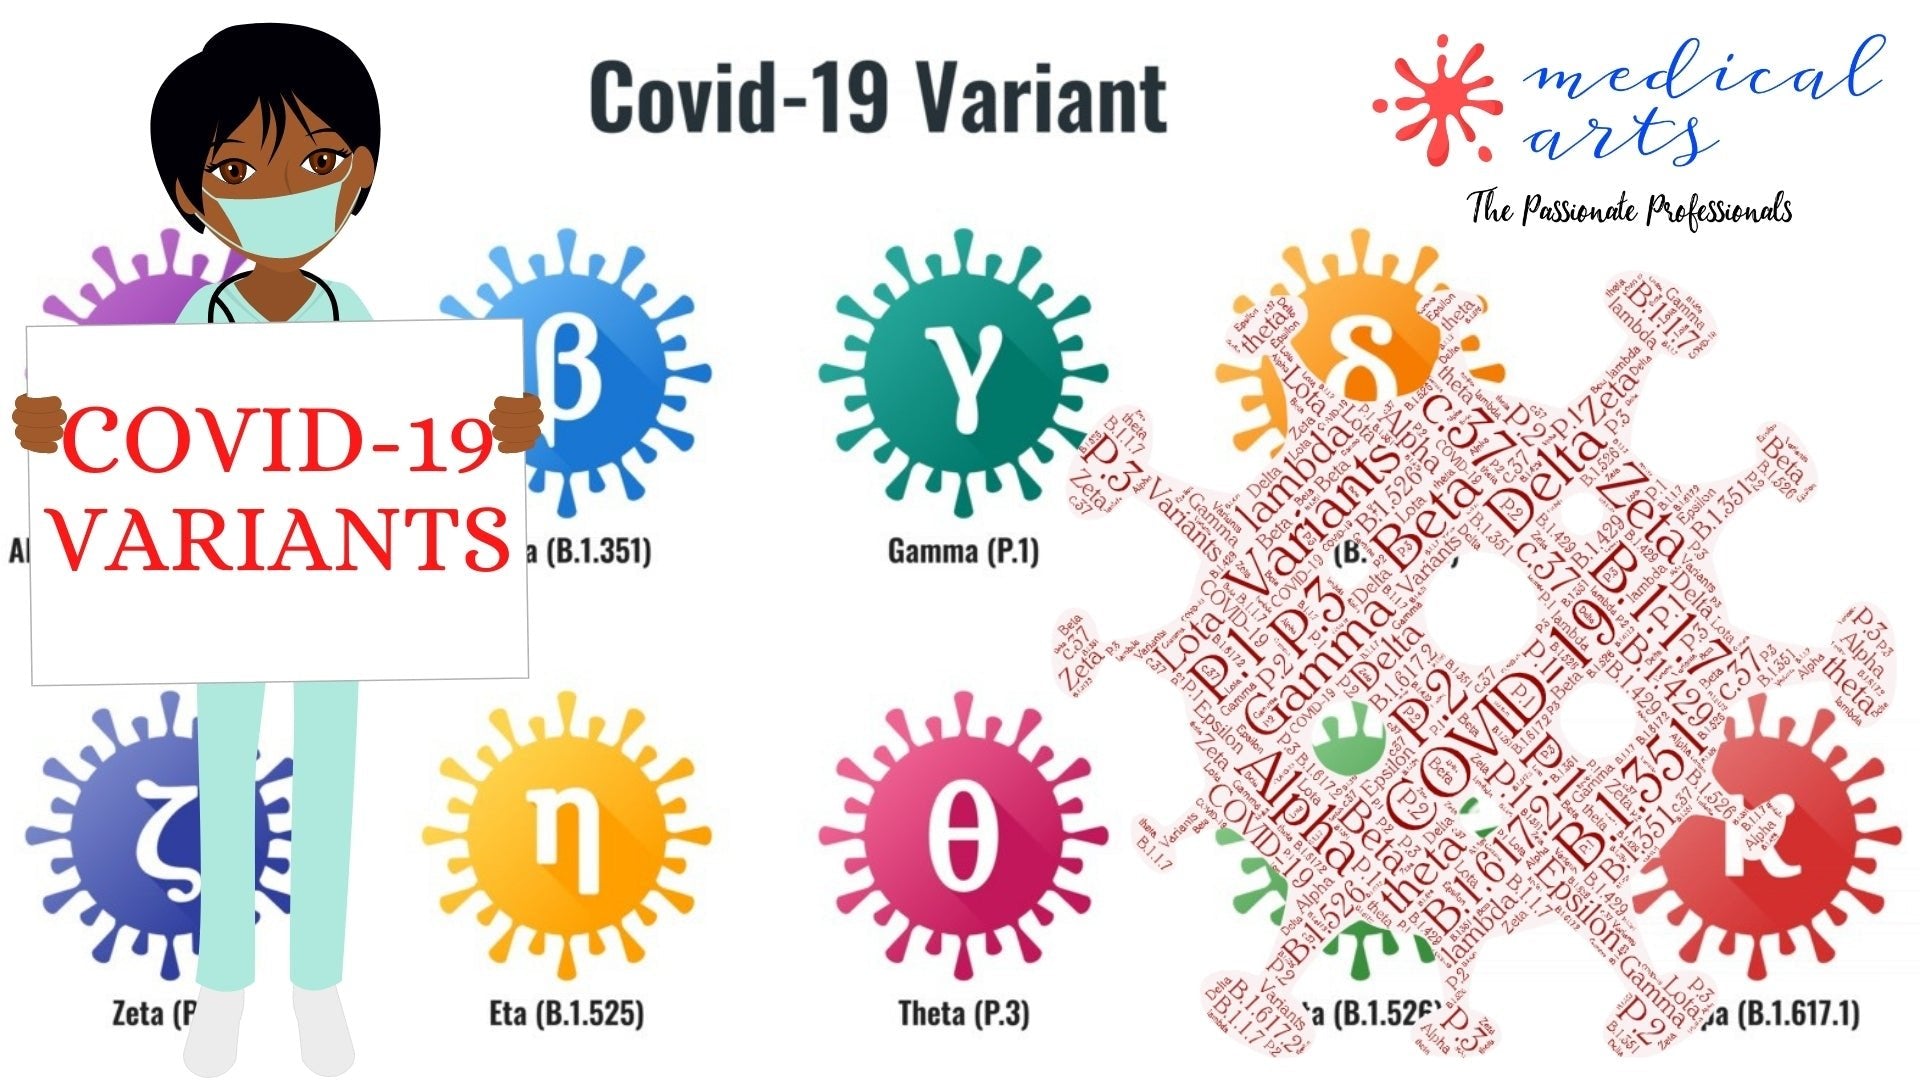 COVID-19 Variants explained - Variants of concern vs Variants of interest - characteristics of each variant/mutation - Video Included